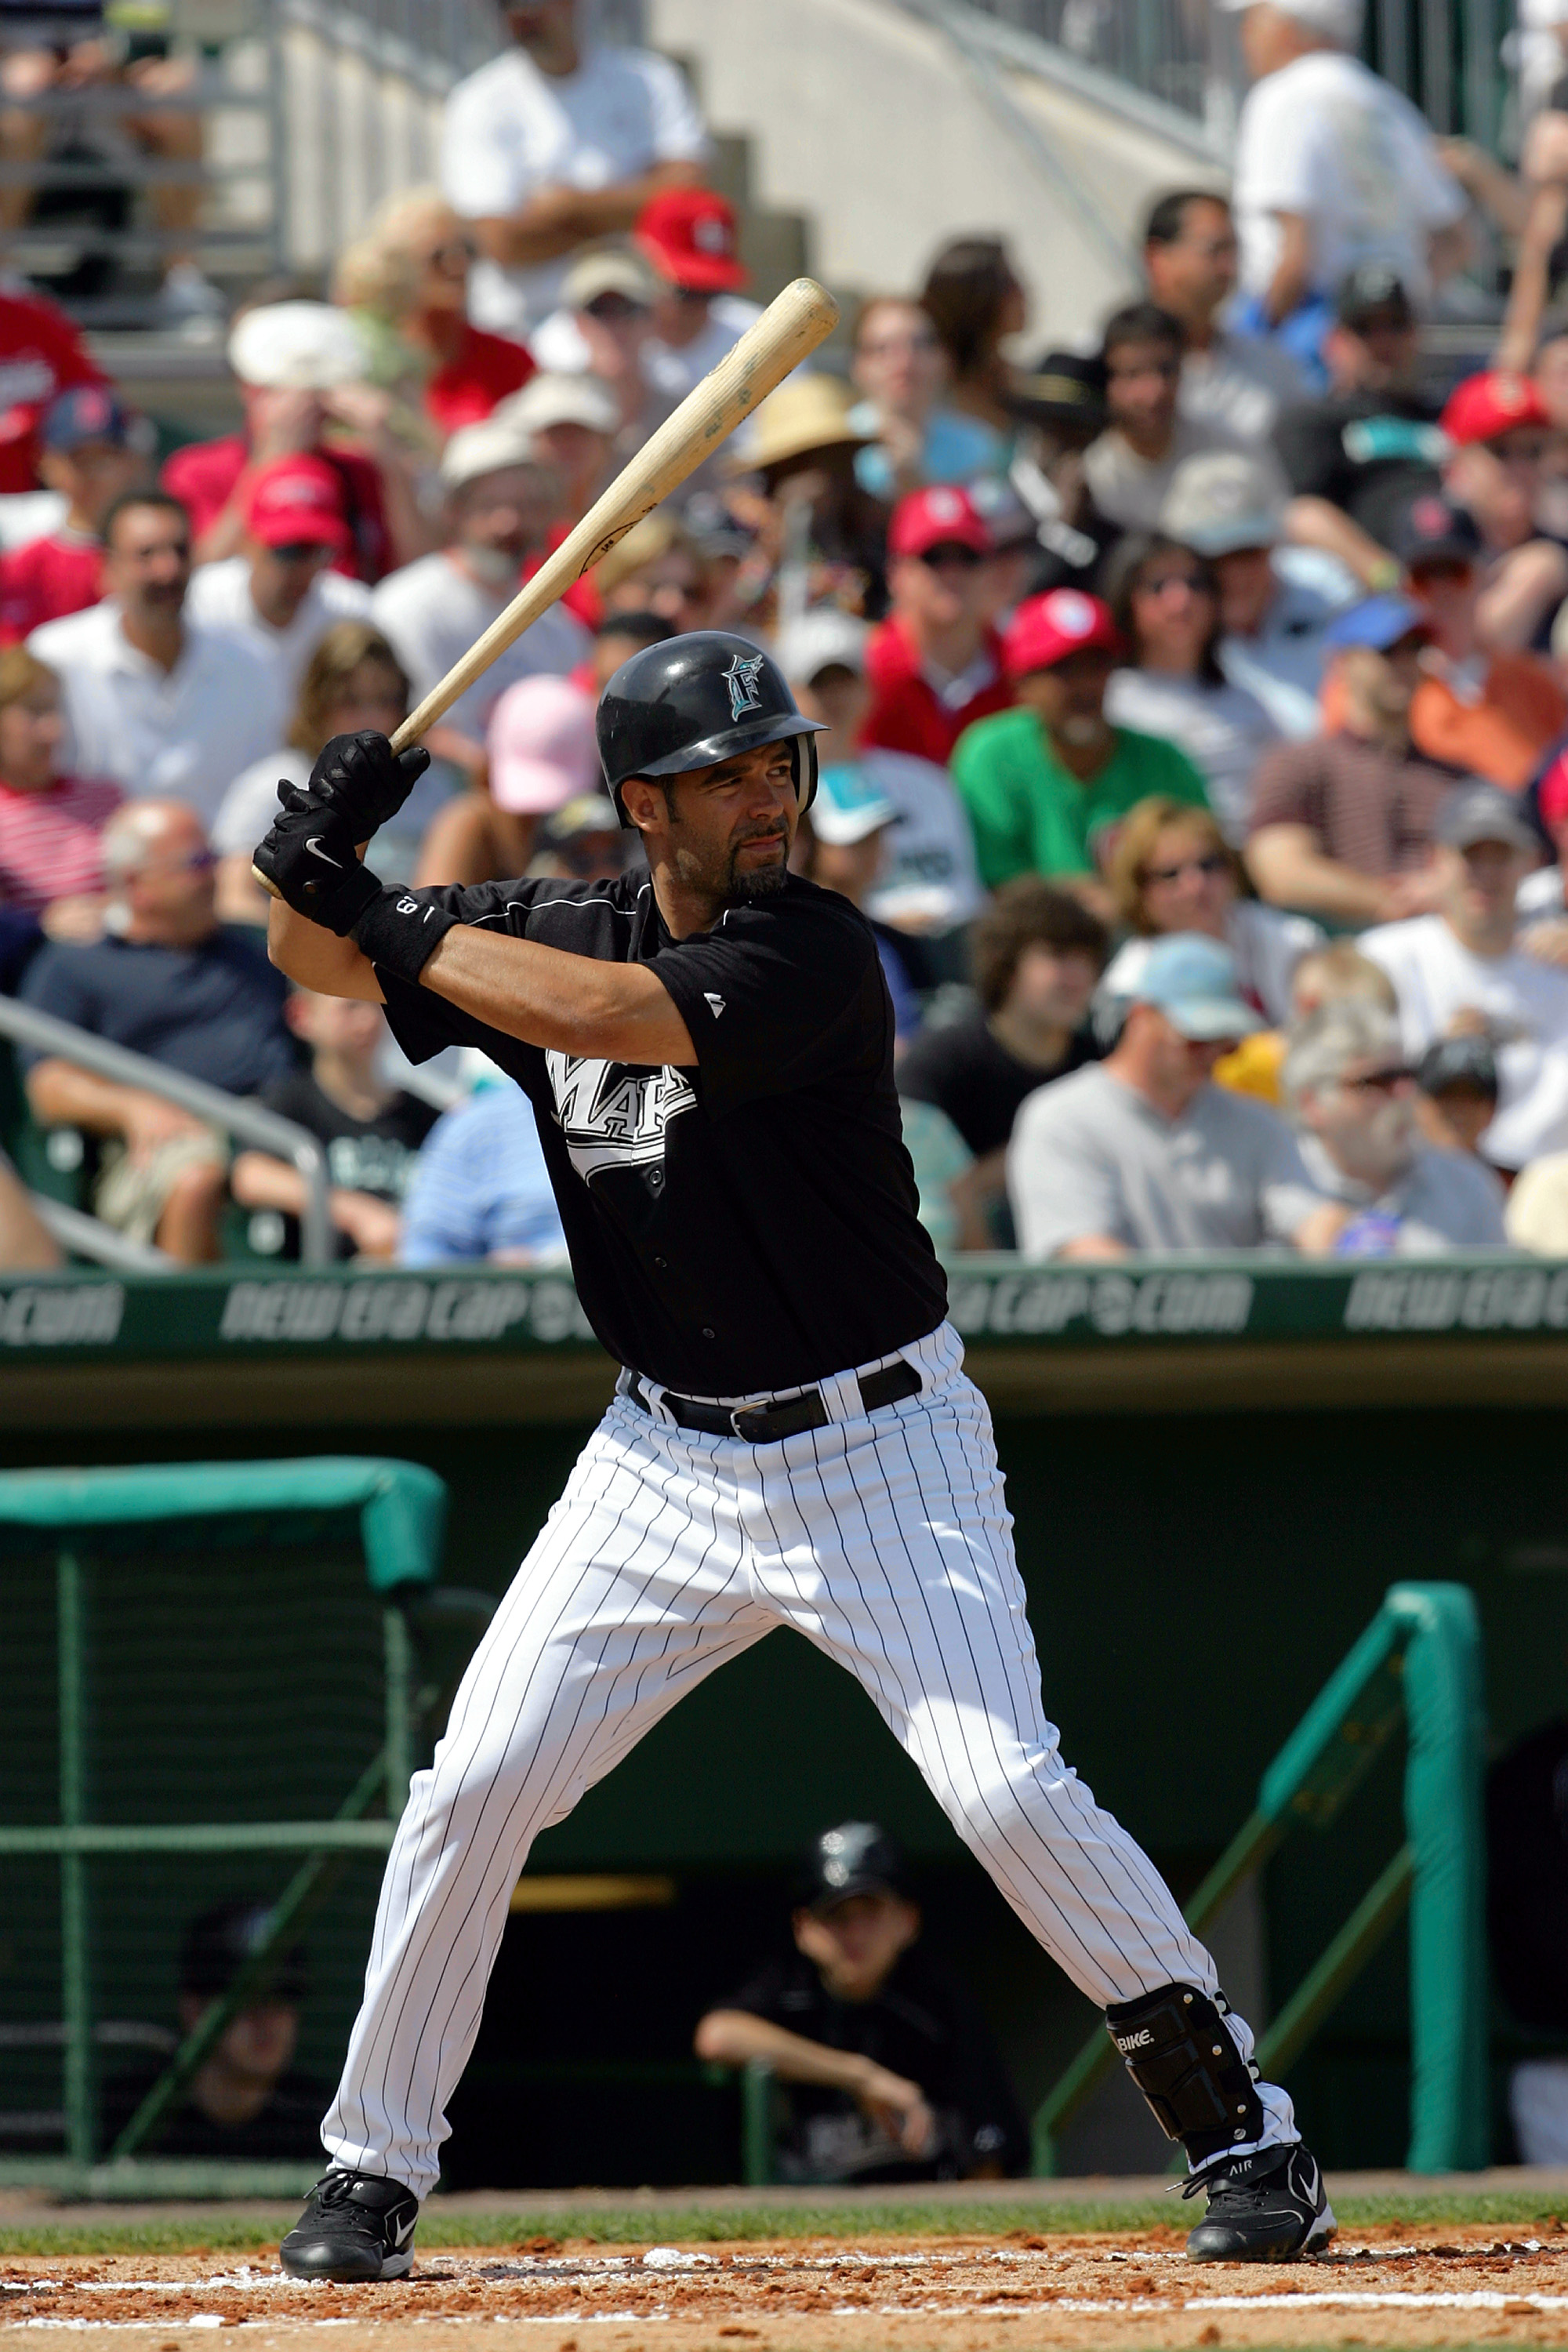 JUPITER, FL - MARCH 6:  Mike Lowell #19 of the Florida Marlins at bat against the St. Louis Cardinals during MLB Spring Training on March 6, 2005 at Robert Dean Stadium in Jupiter, Florida. The Cardinals defeated the Marlins 5-1.  (Photo by Ronald Martine